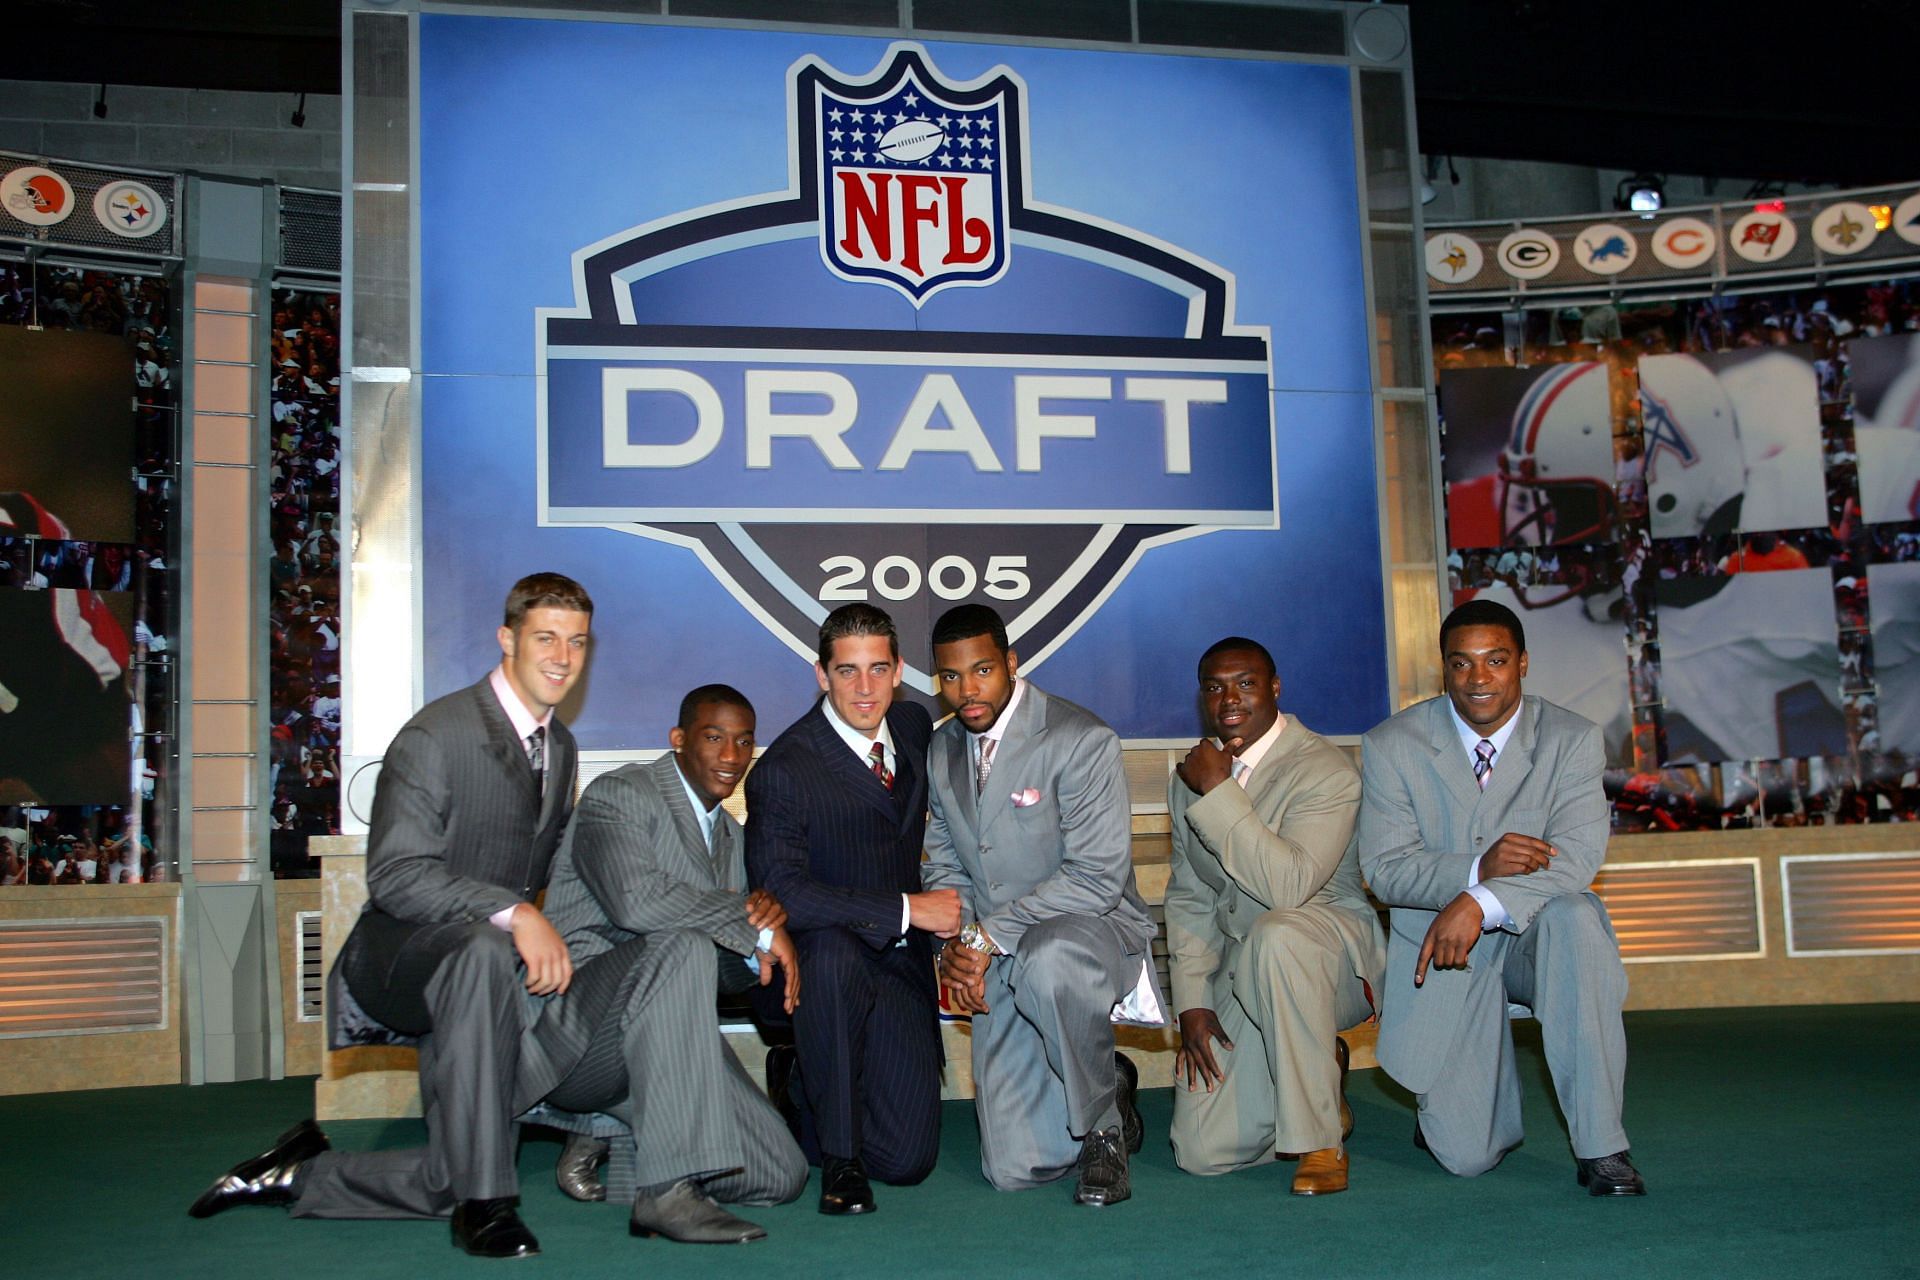 The 2005 NFL Draft was a nightmare day for Aaron Rodgers